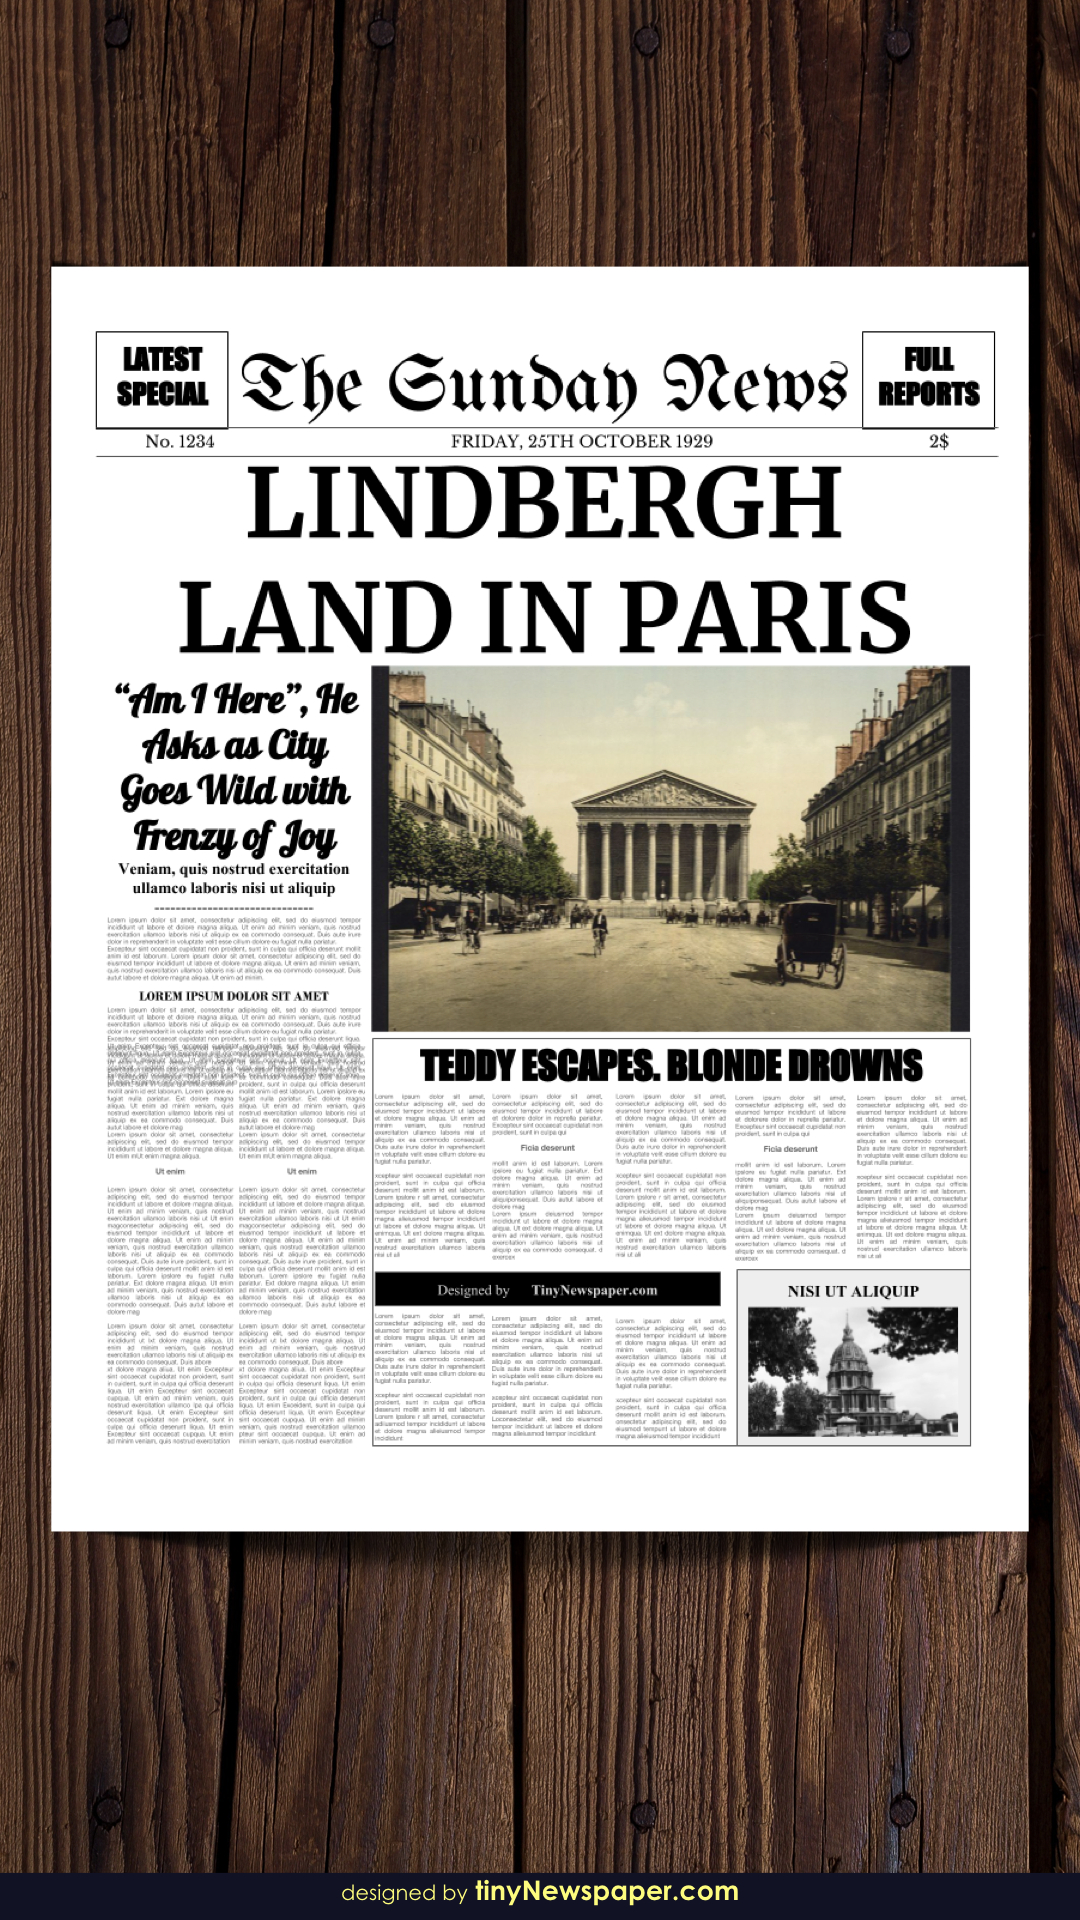 Powerpoint Newspaper Template Throughout Newspaper Template For Powerpoint